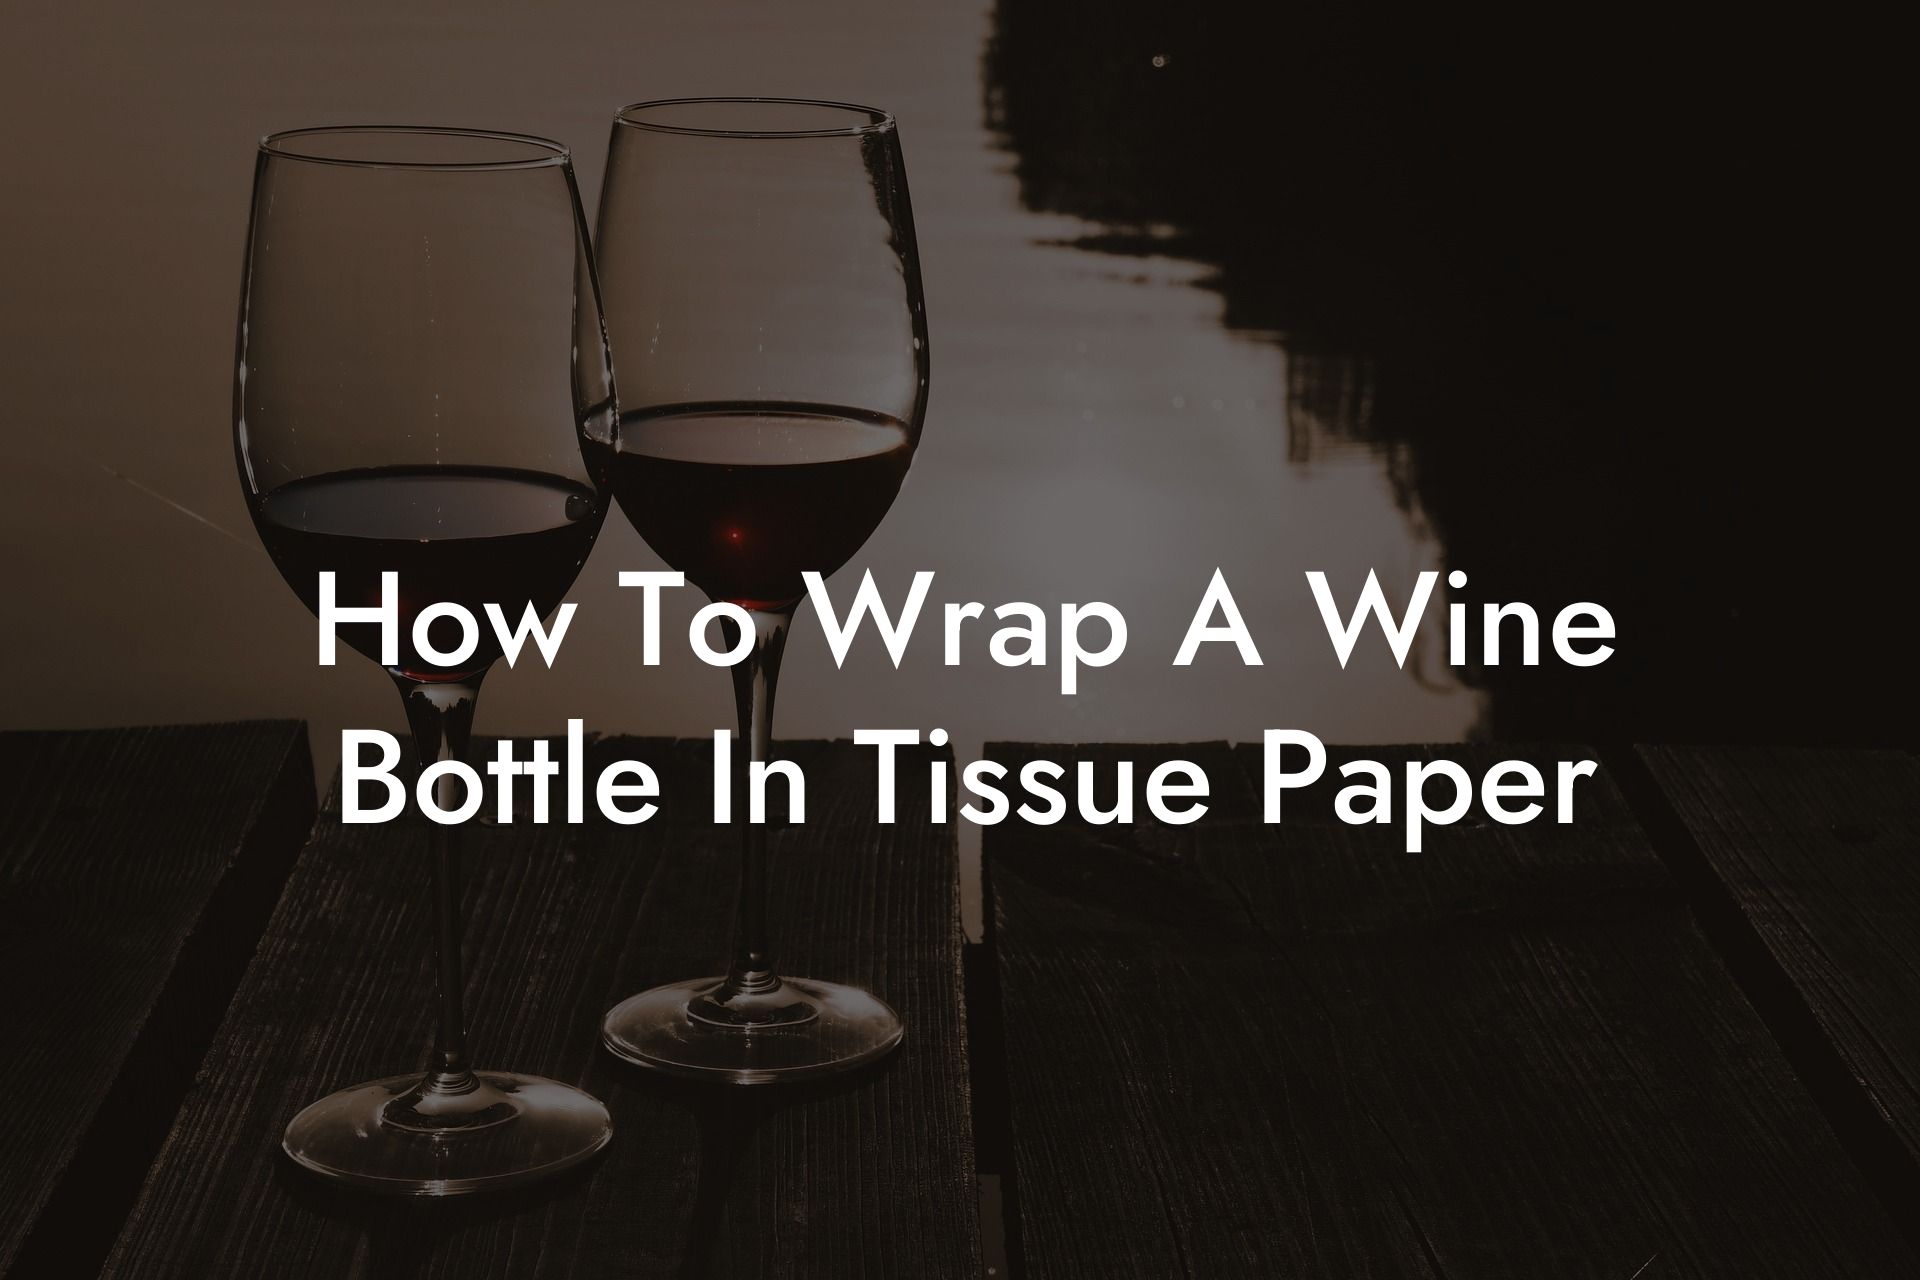 How To Wrap A Wine Bottle In Tissue Paper